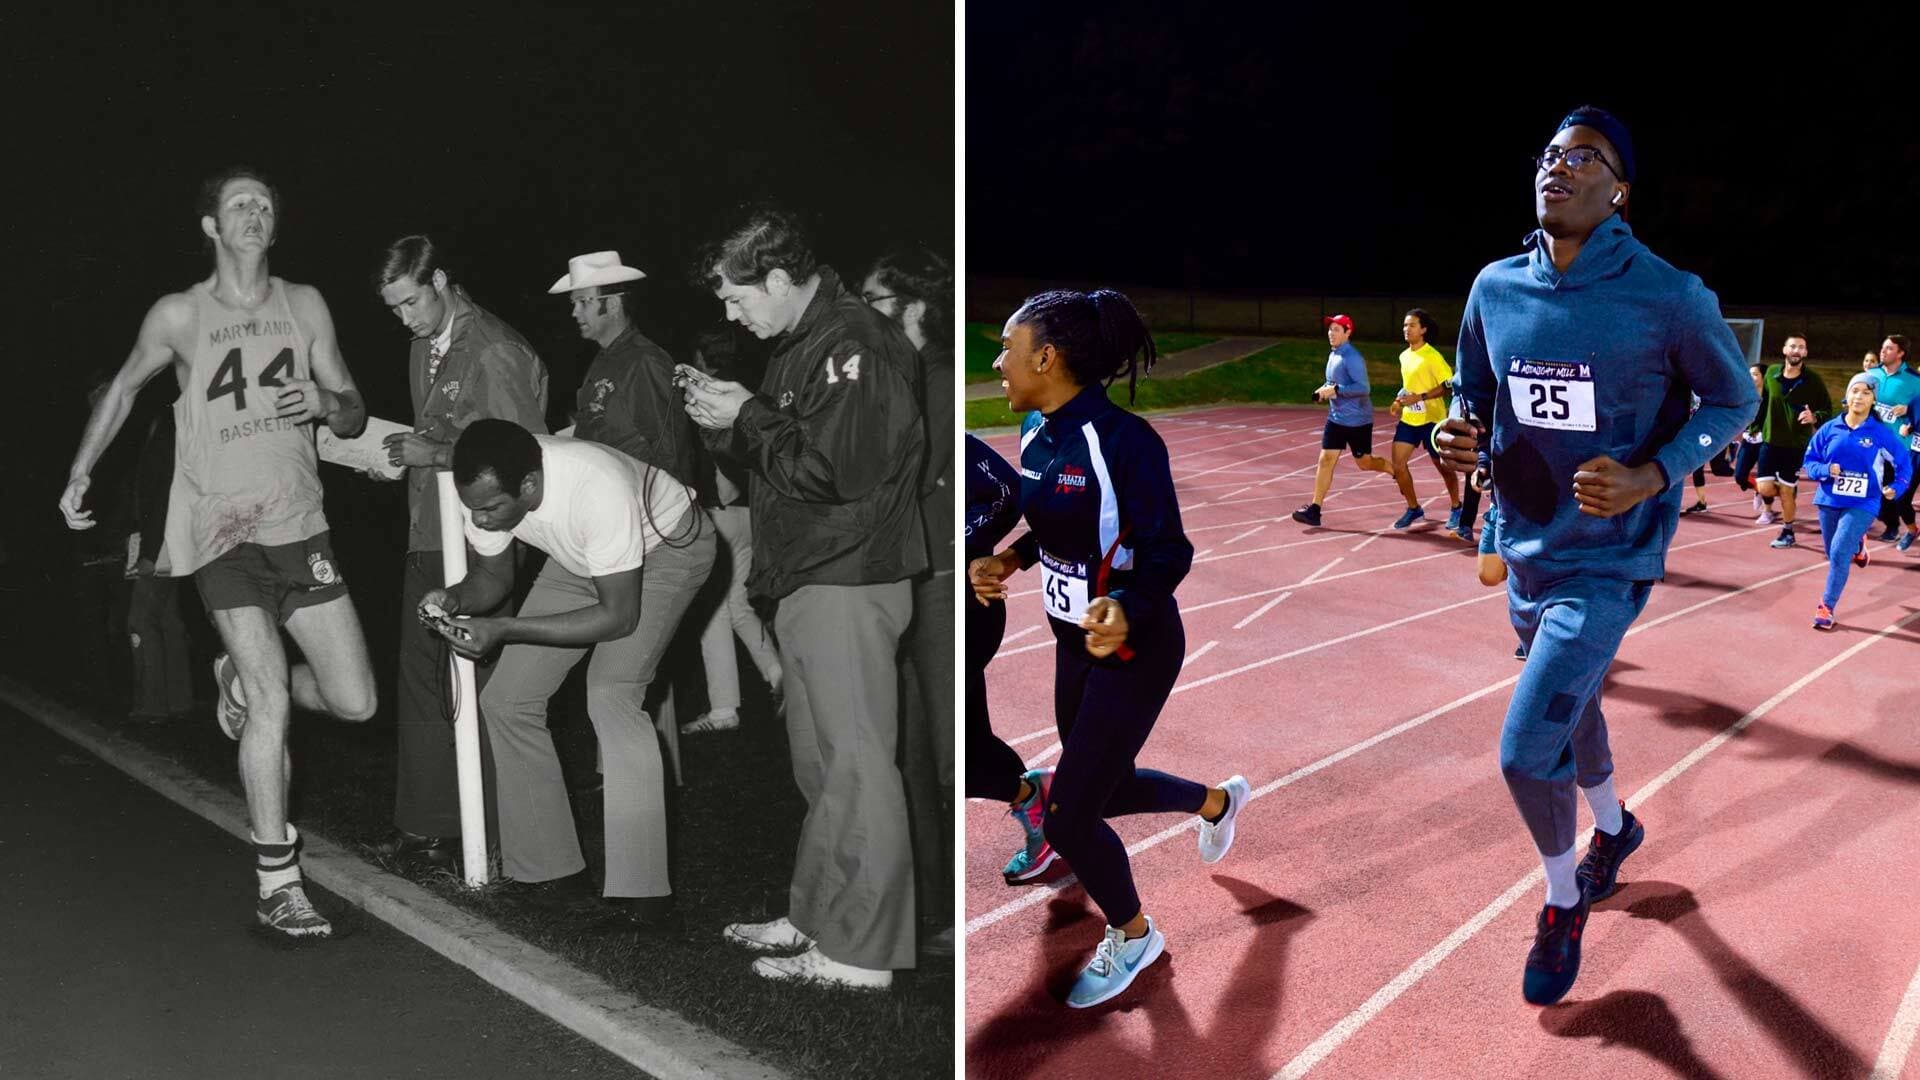 Archival and new pictures of UMD basketball players running the Midnight Mile